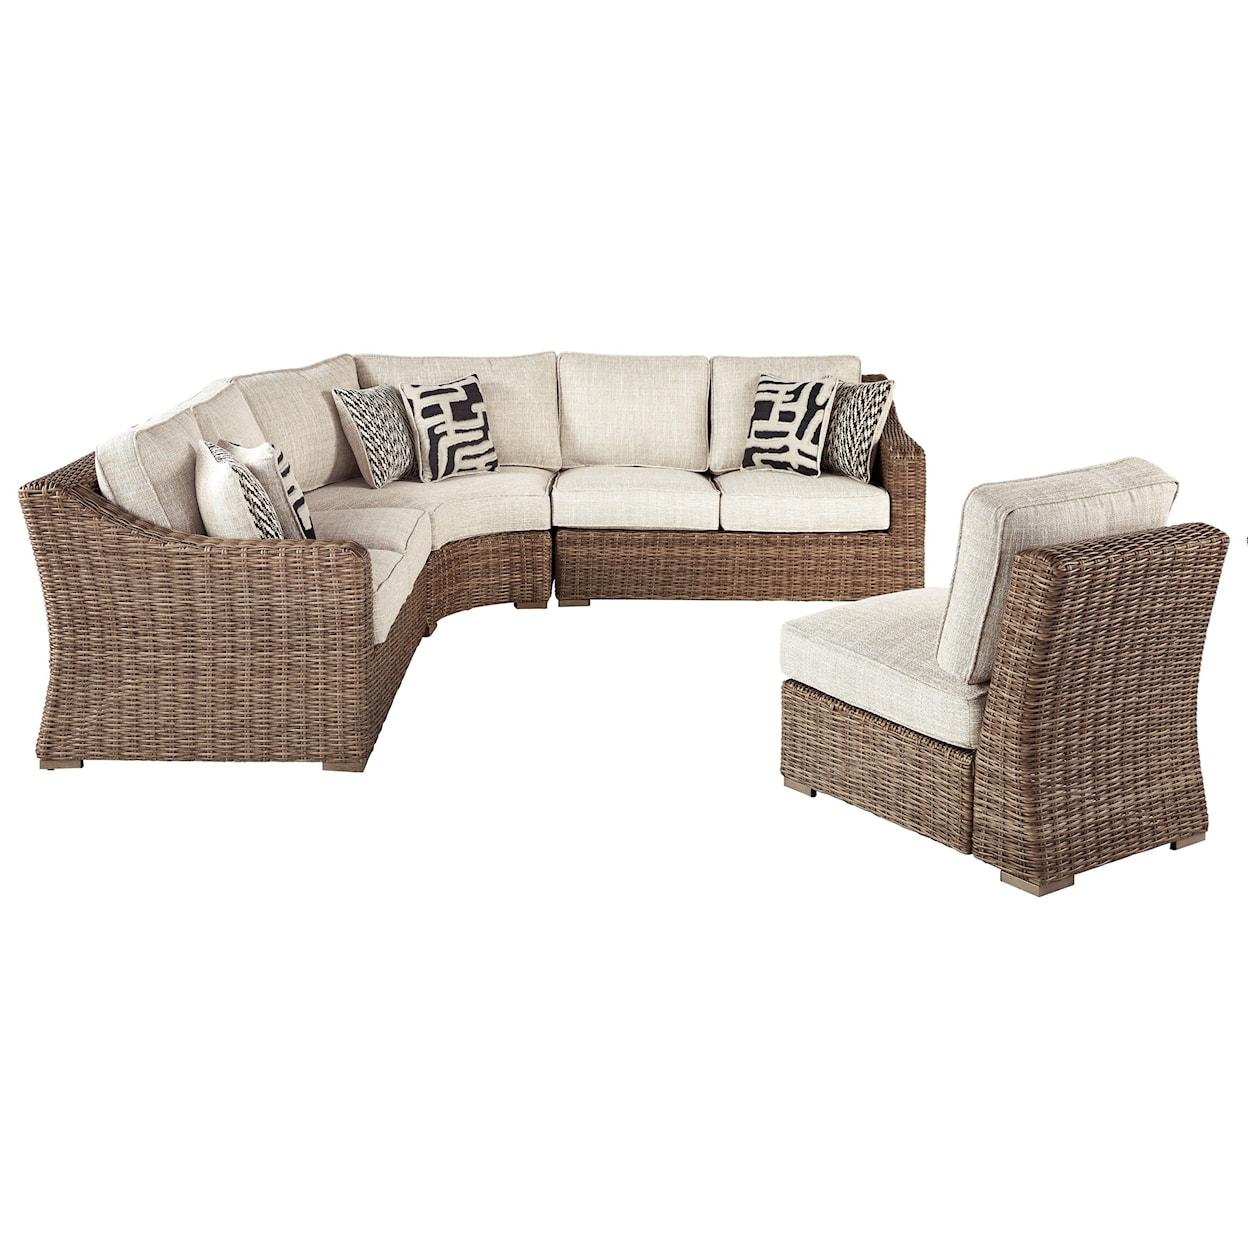 Belfort Select Bethany 4 Piece Sectional